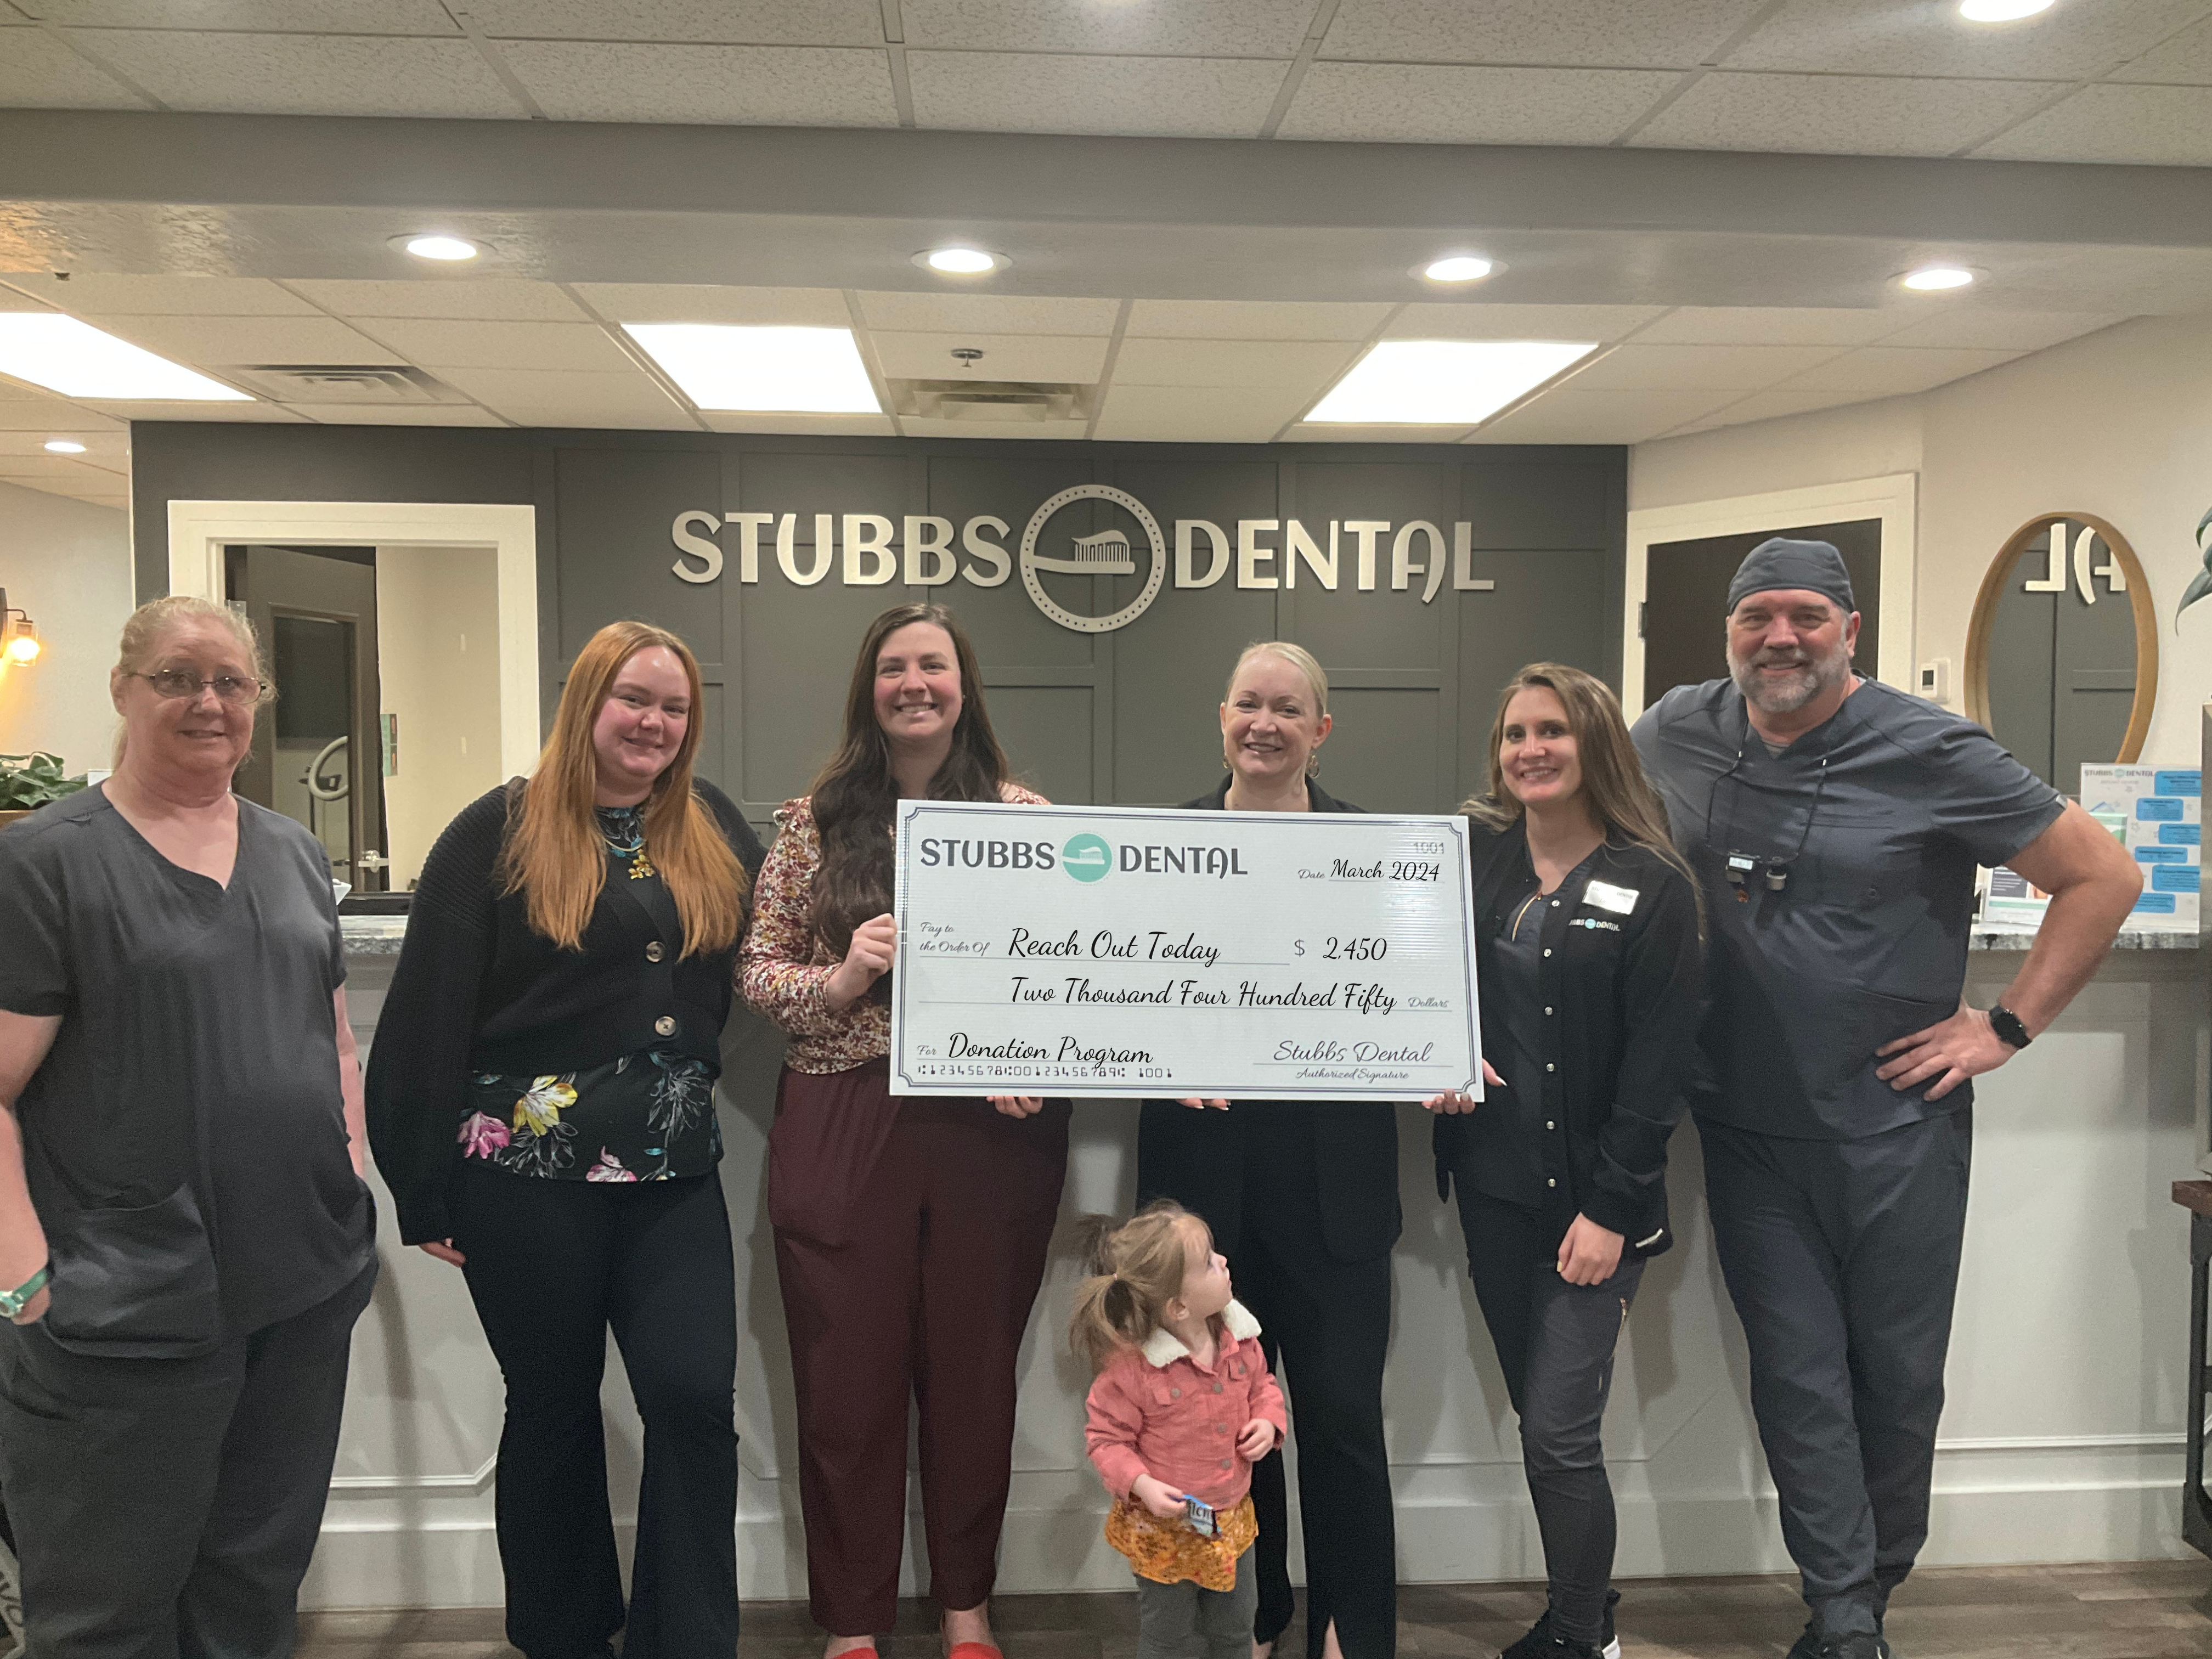 Stubbs Dental Donation to Reach Out Today